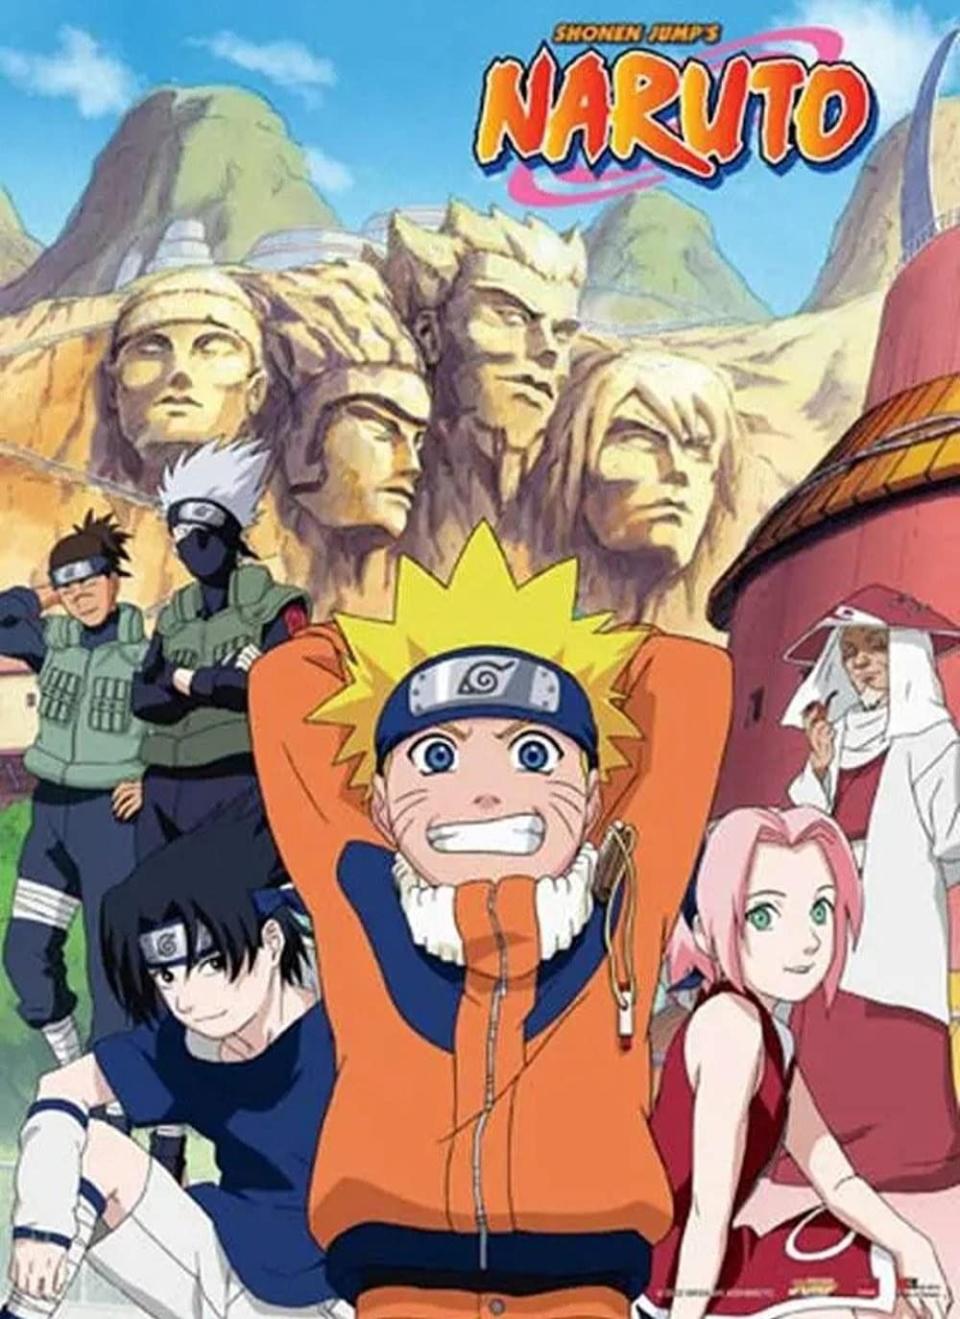 best anime tv shows and movies on netflix, naruto